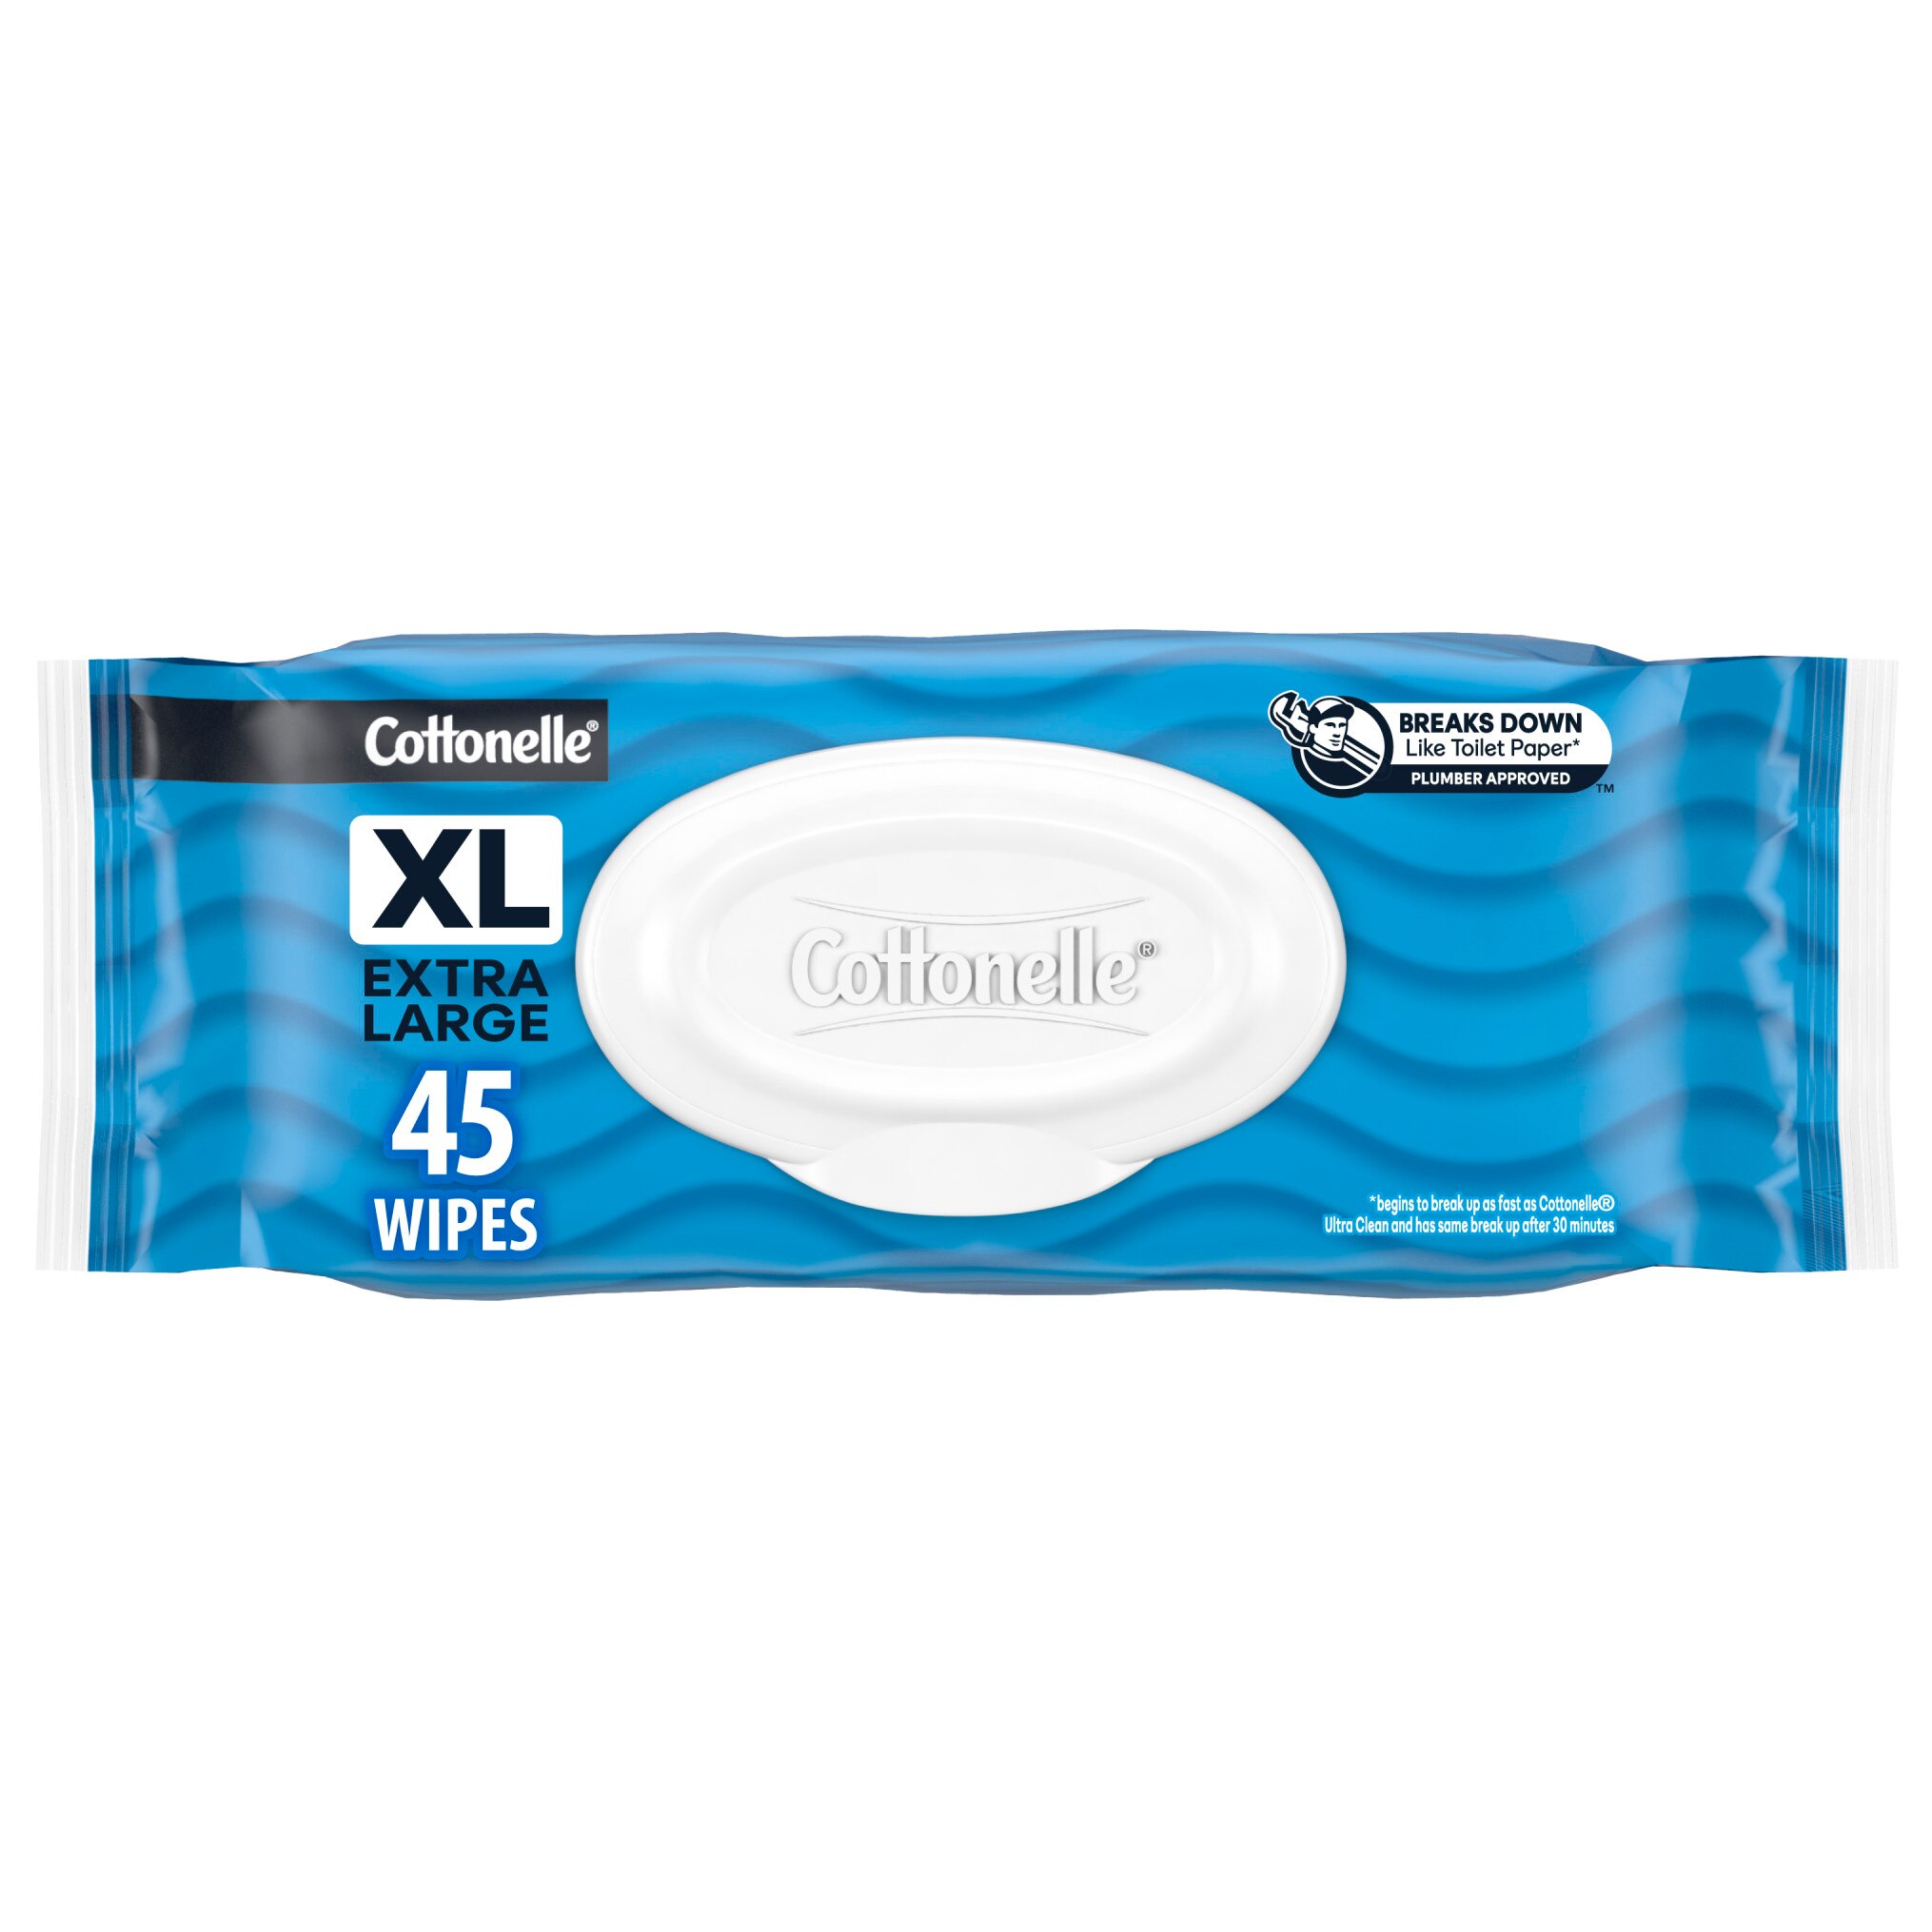  Cottonelle XL Flushable Wet Wipes Flip-Top Pack, Extra Large, 1 Flip-Top Pack, 45 Wipes 